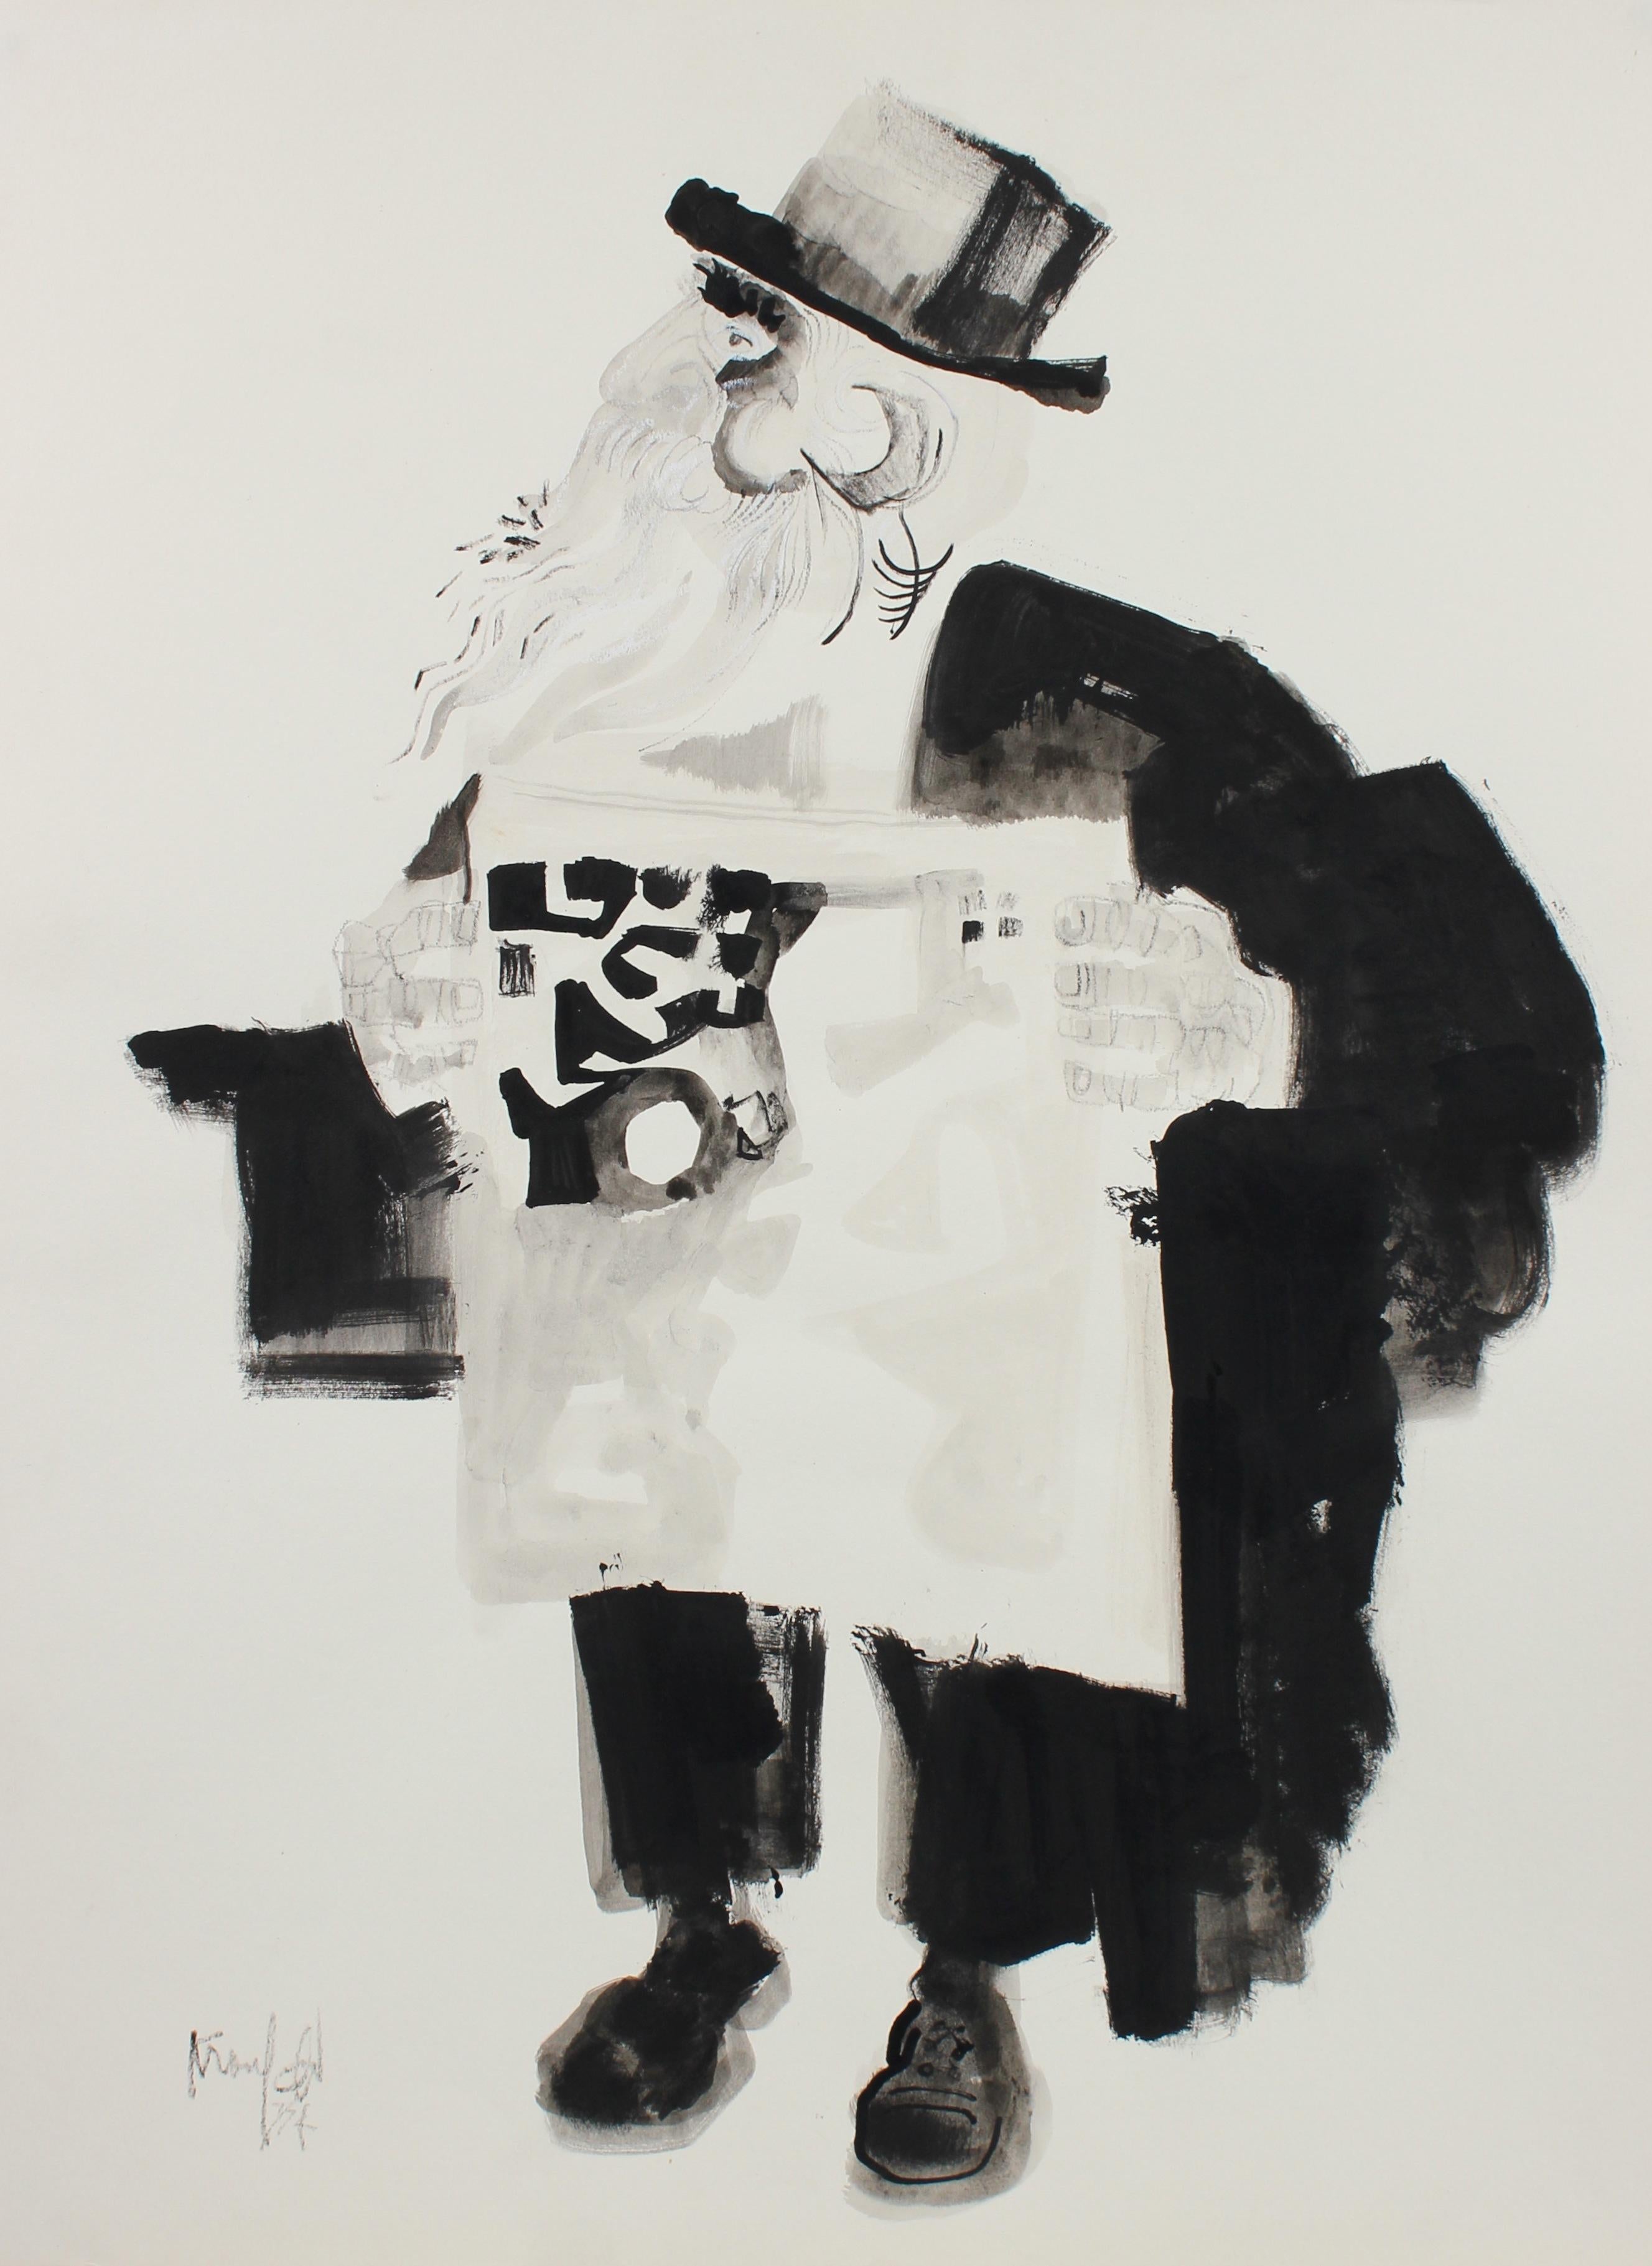 Morris Kronfeld Figurative Art - 1970's Drawing of a Man With Newspaper in Ink